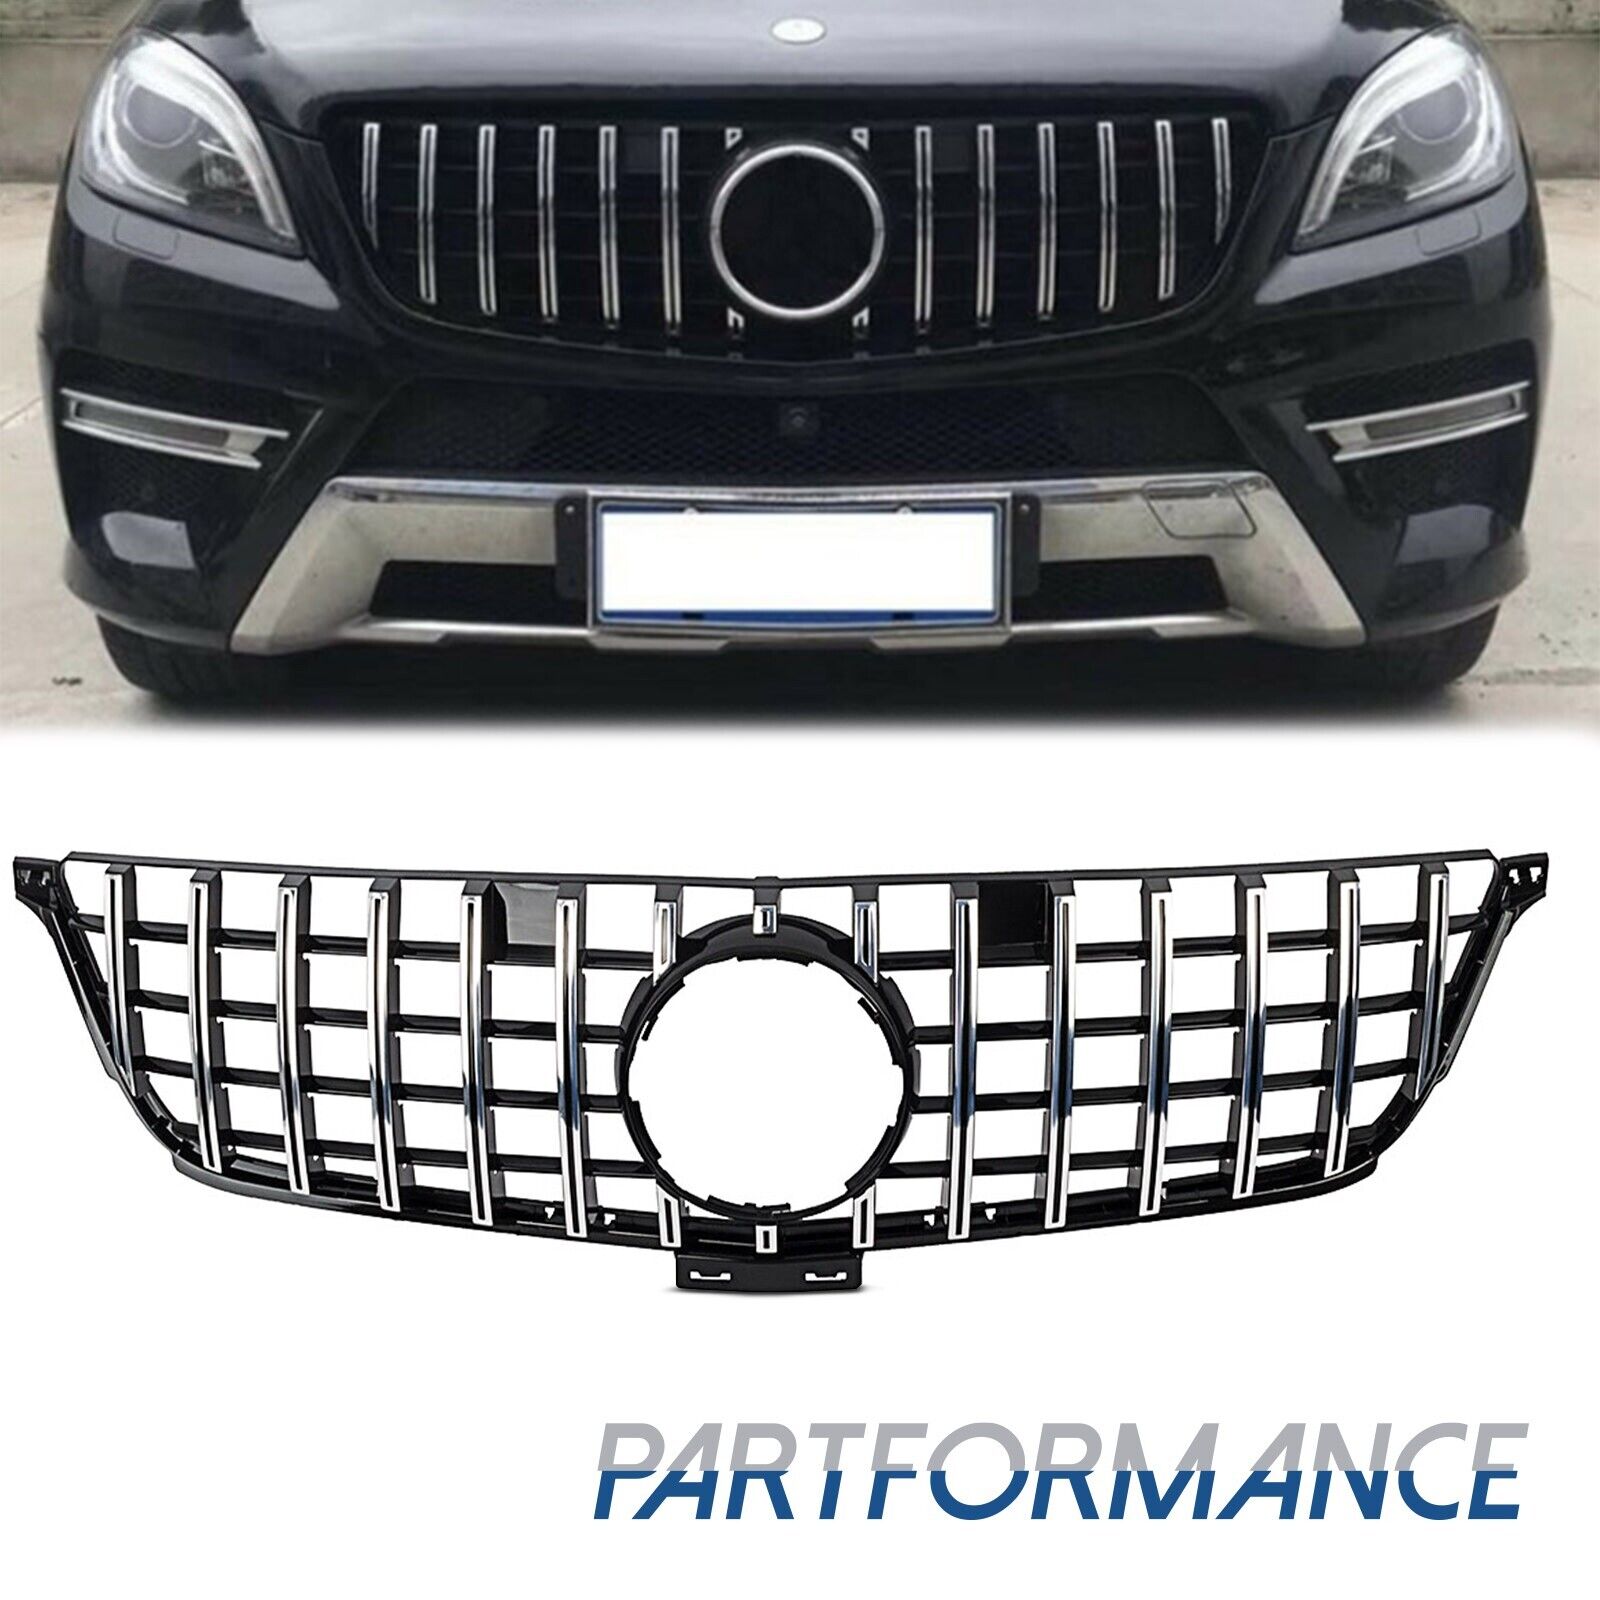 Front GT Grille Chrome Black For Mercedes Benz W166 2012-2015 ML350 400 550 AMG